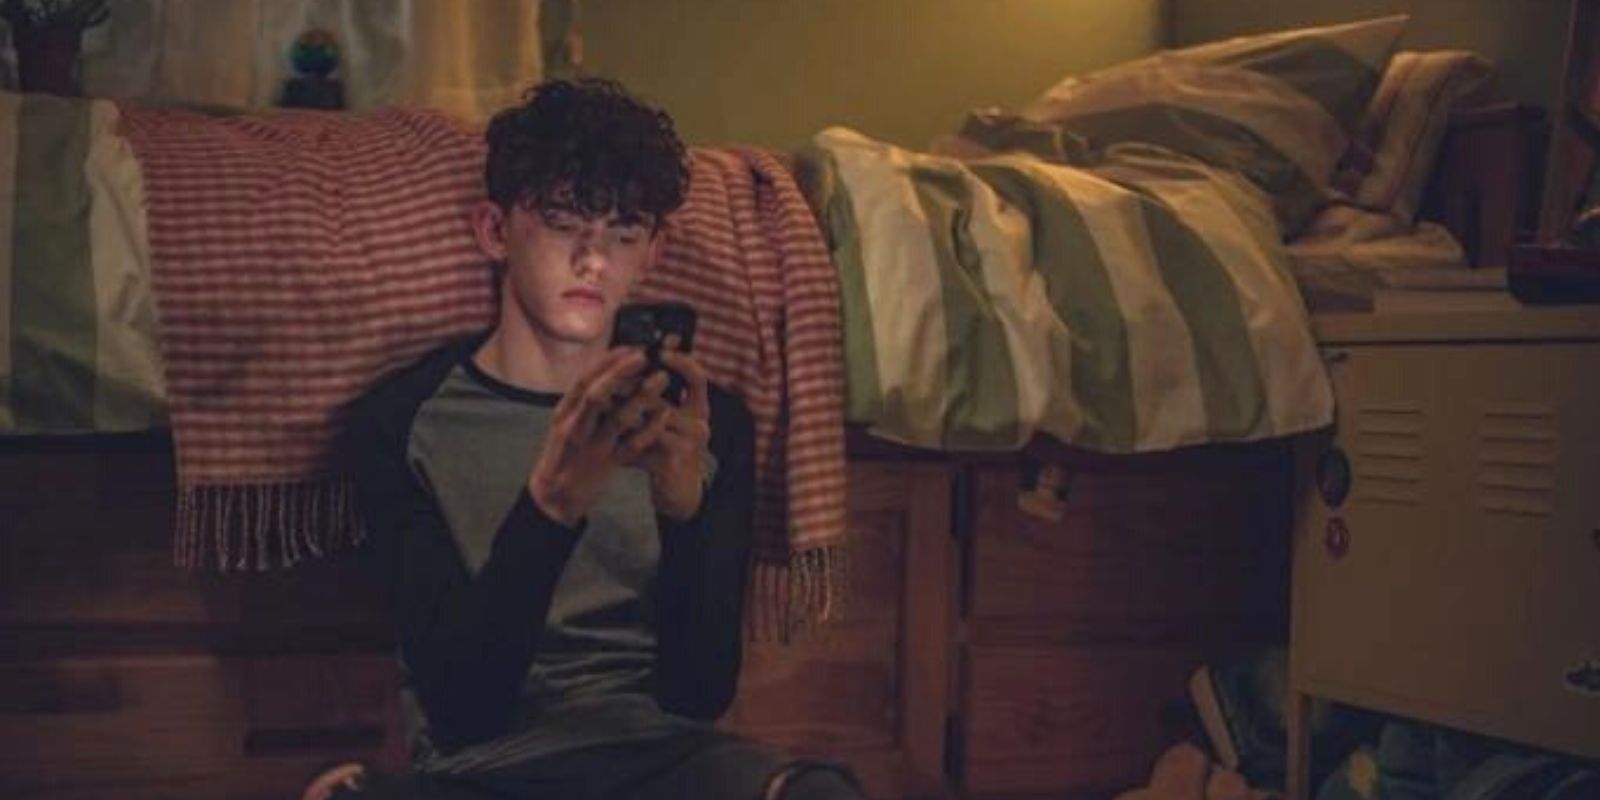 Charlie in his bedroom on his phone